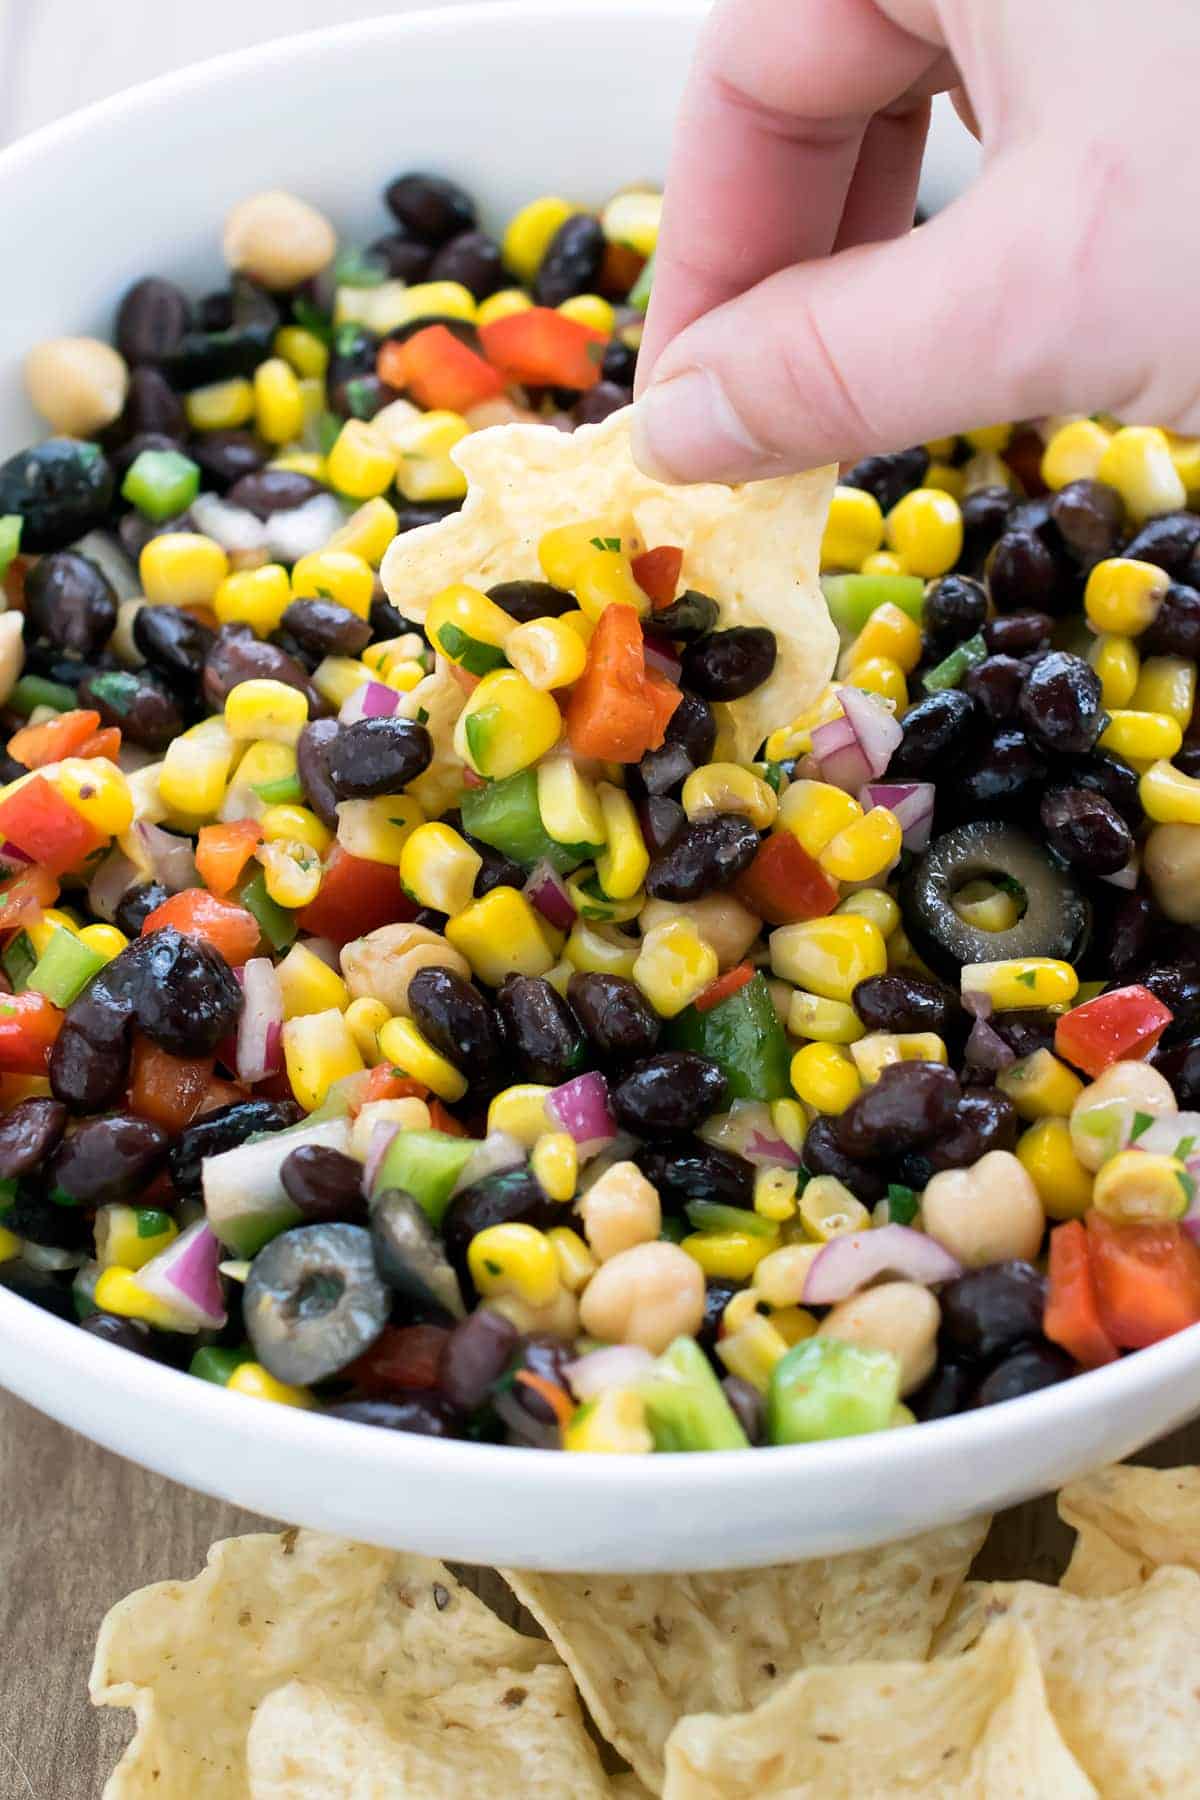 Delicious corn and black bean salad packed with fresh vegetables, beans, tossed in a tangy lime vinaigrette, served with tortilla scoops.